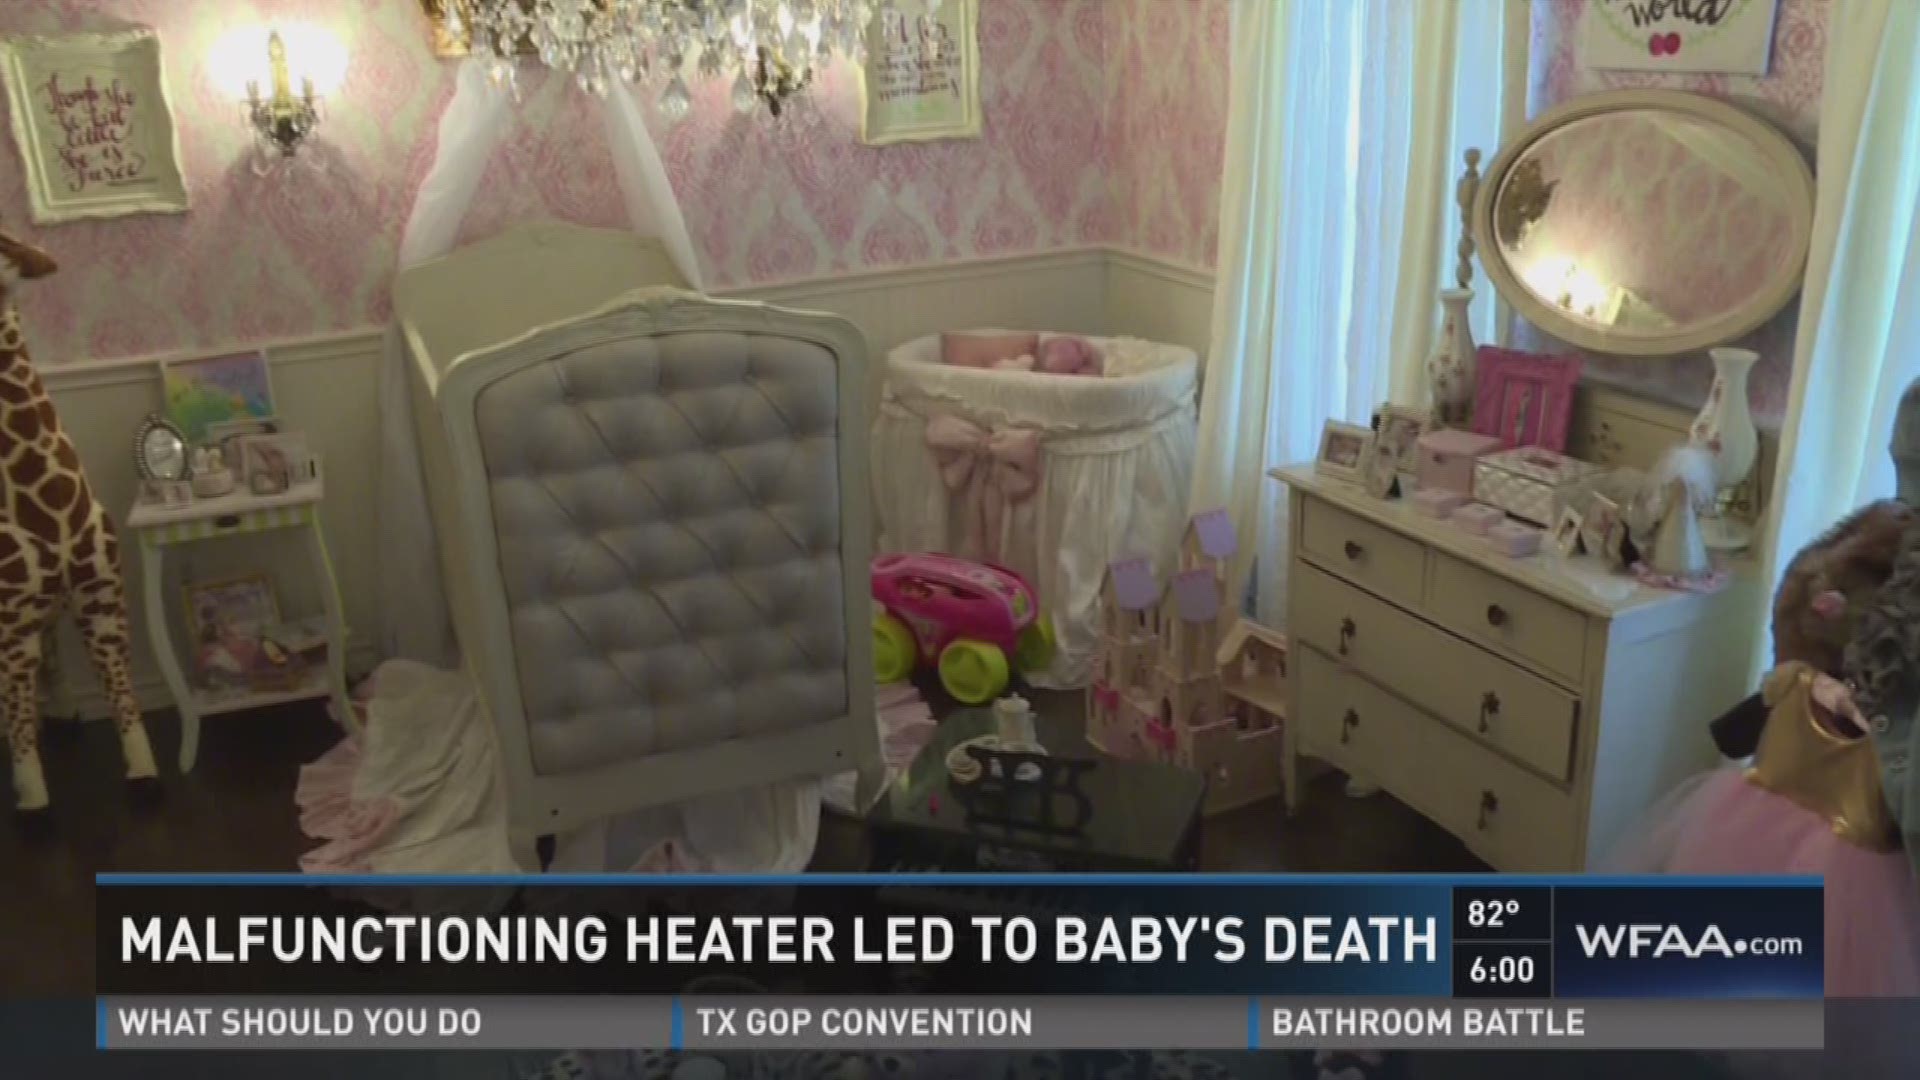 Malfunctioning heater led to baby's death